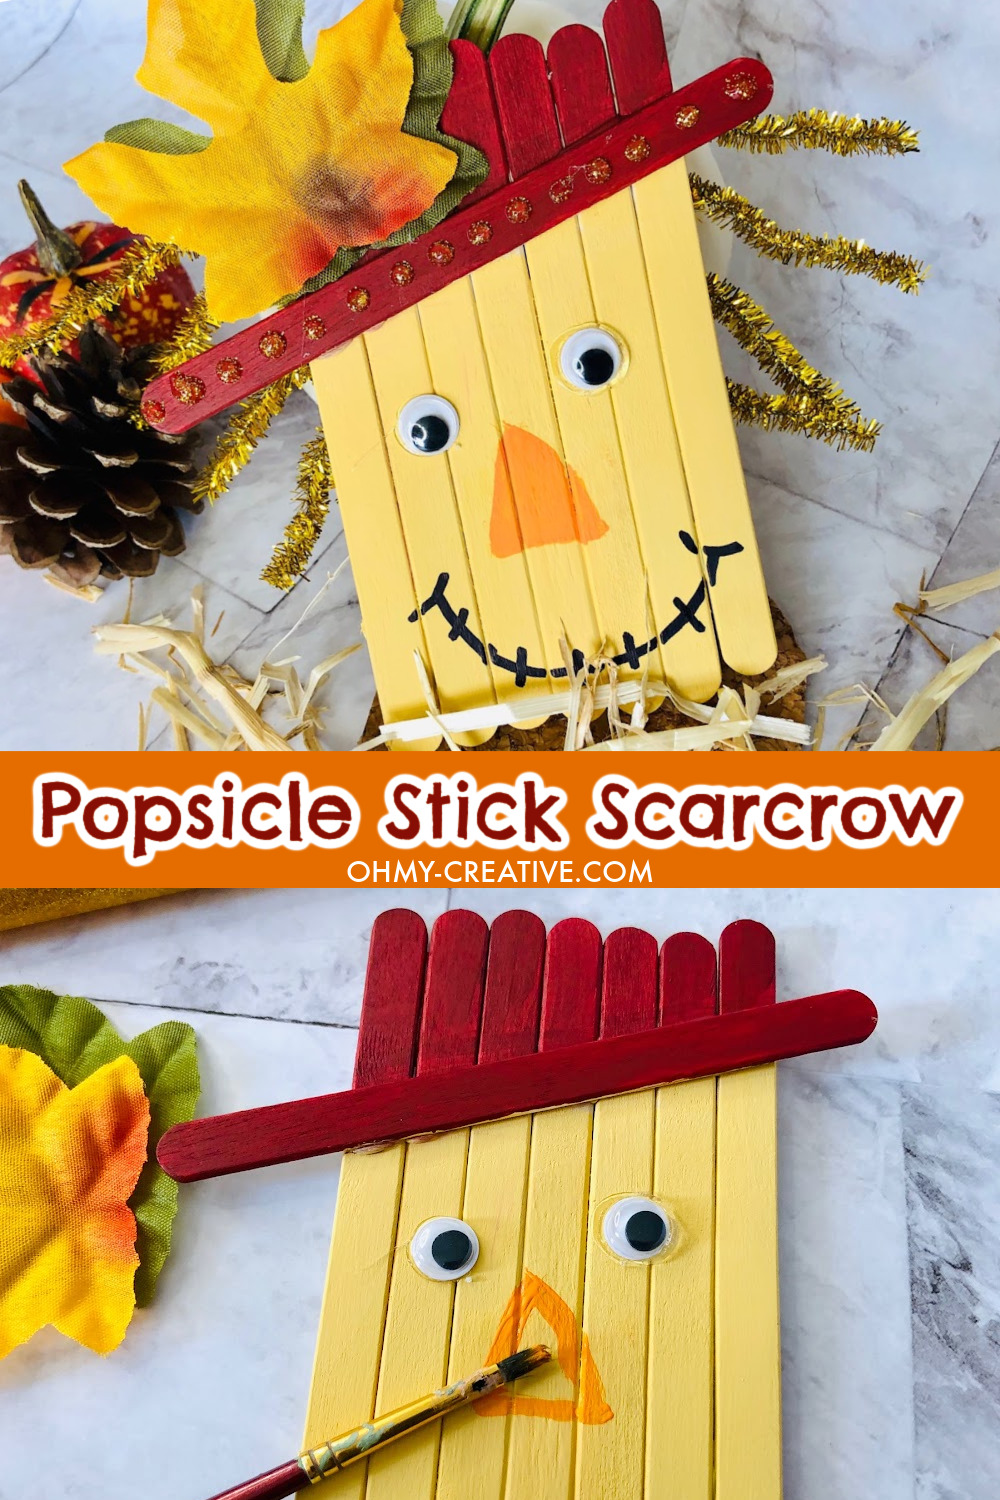 A cute and fun scarecrow fall craft made out of craft sticks.